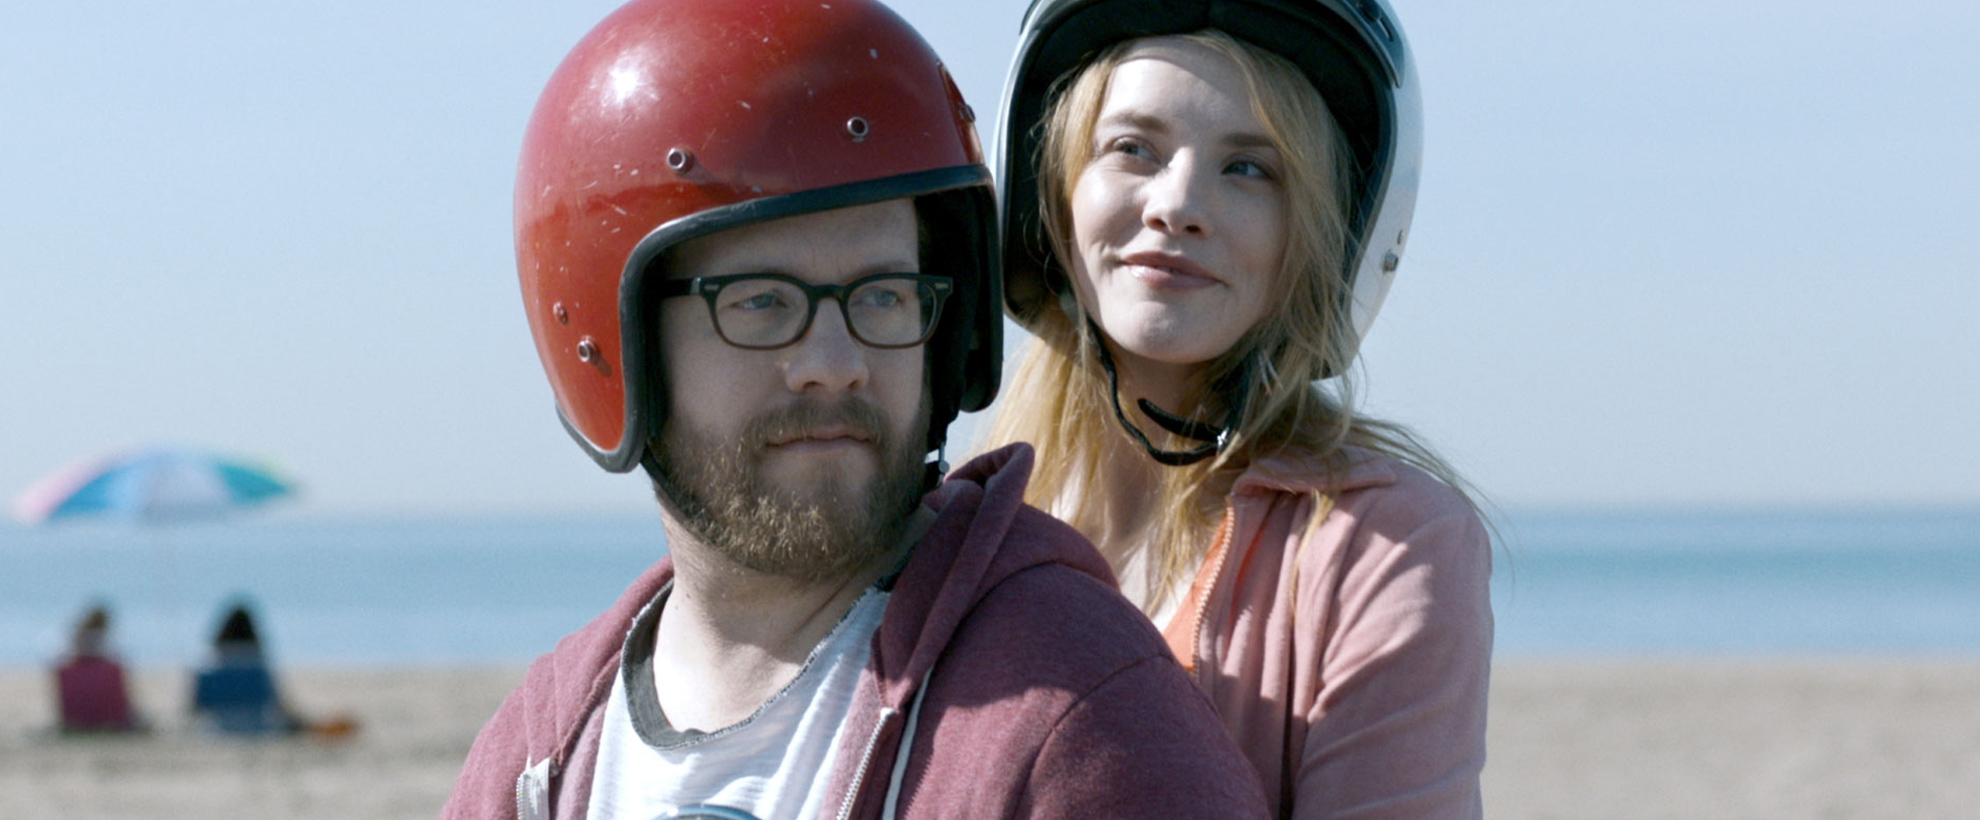 A man and a woman sit on a moped together, wearing helmets